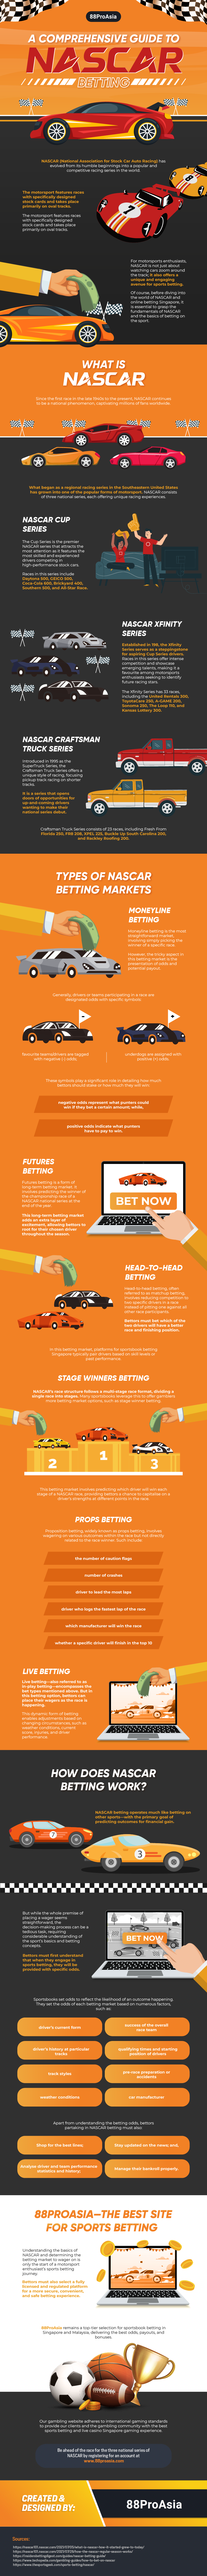 A Comprehensive Guide to NASCAR Betting